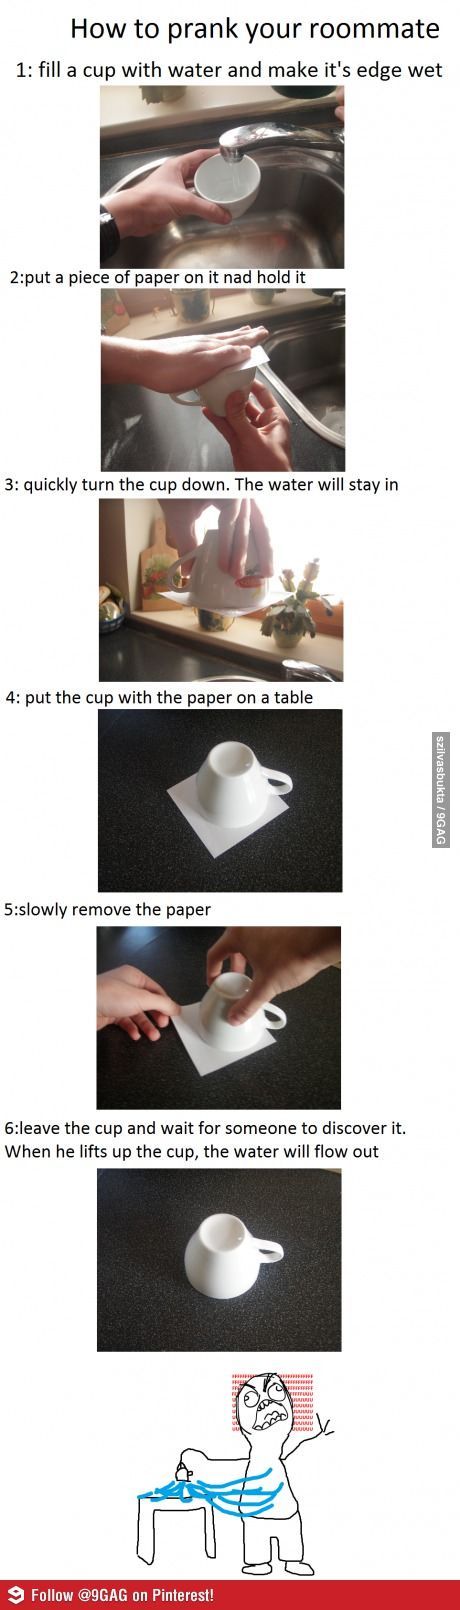 How to prank your roommate